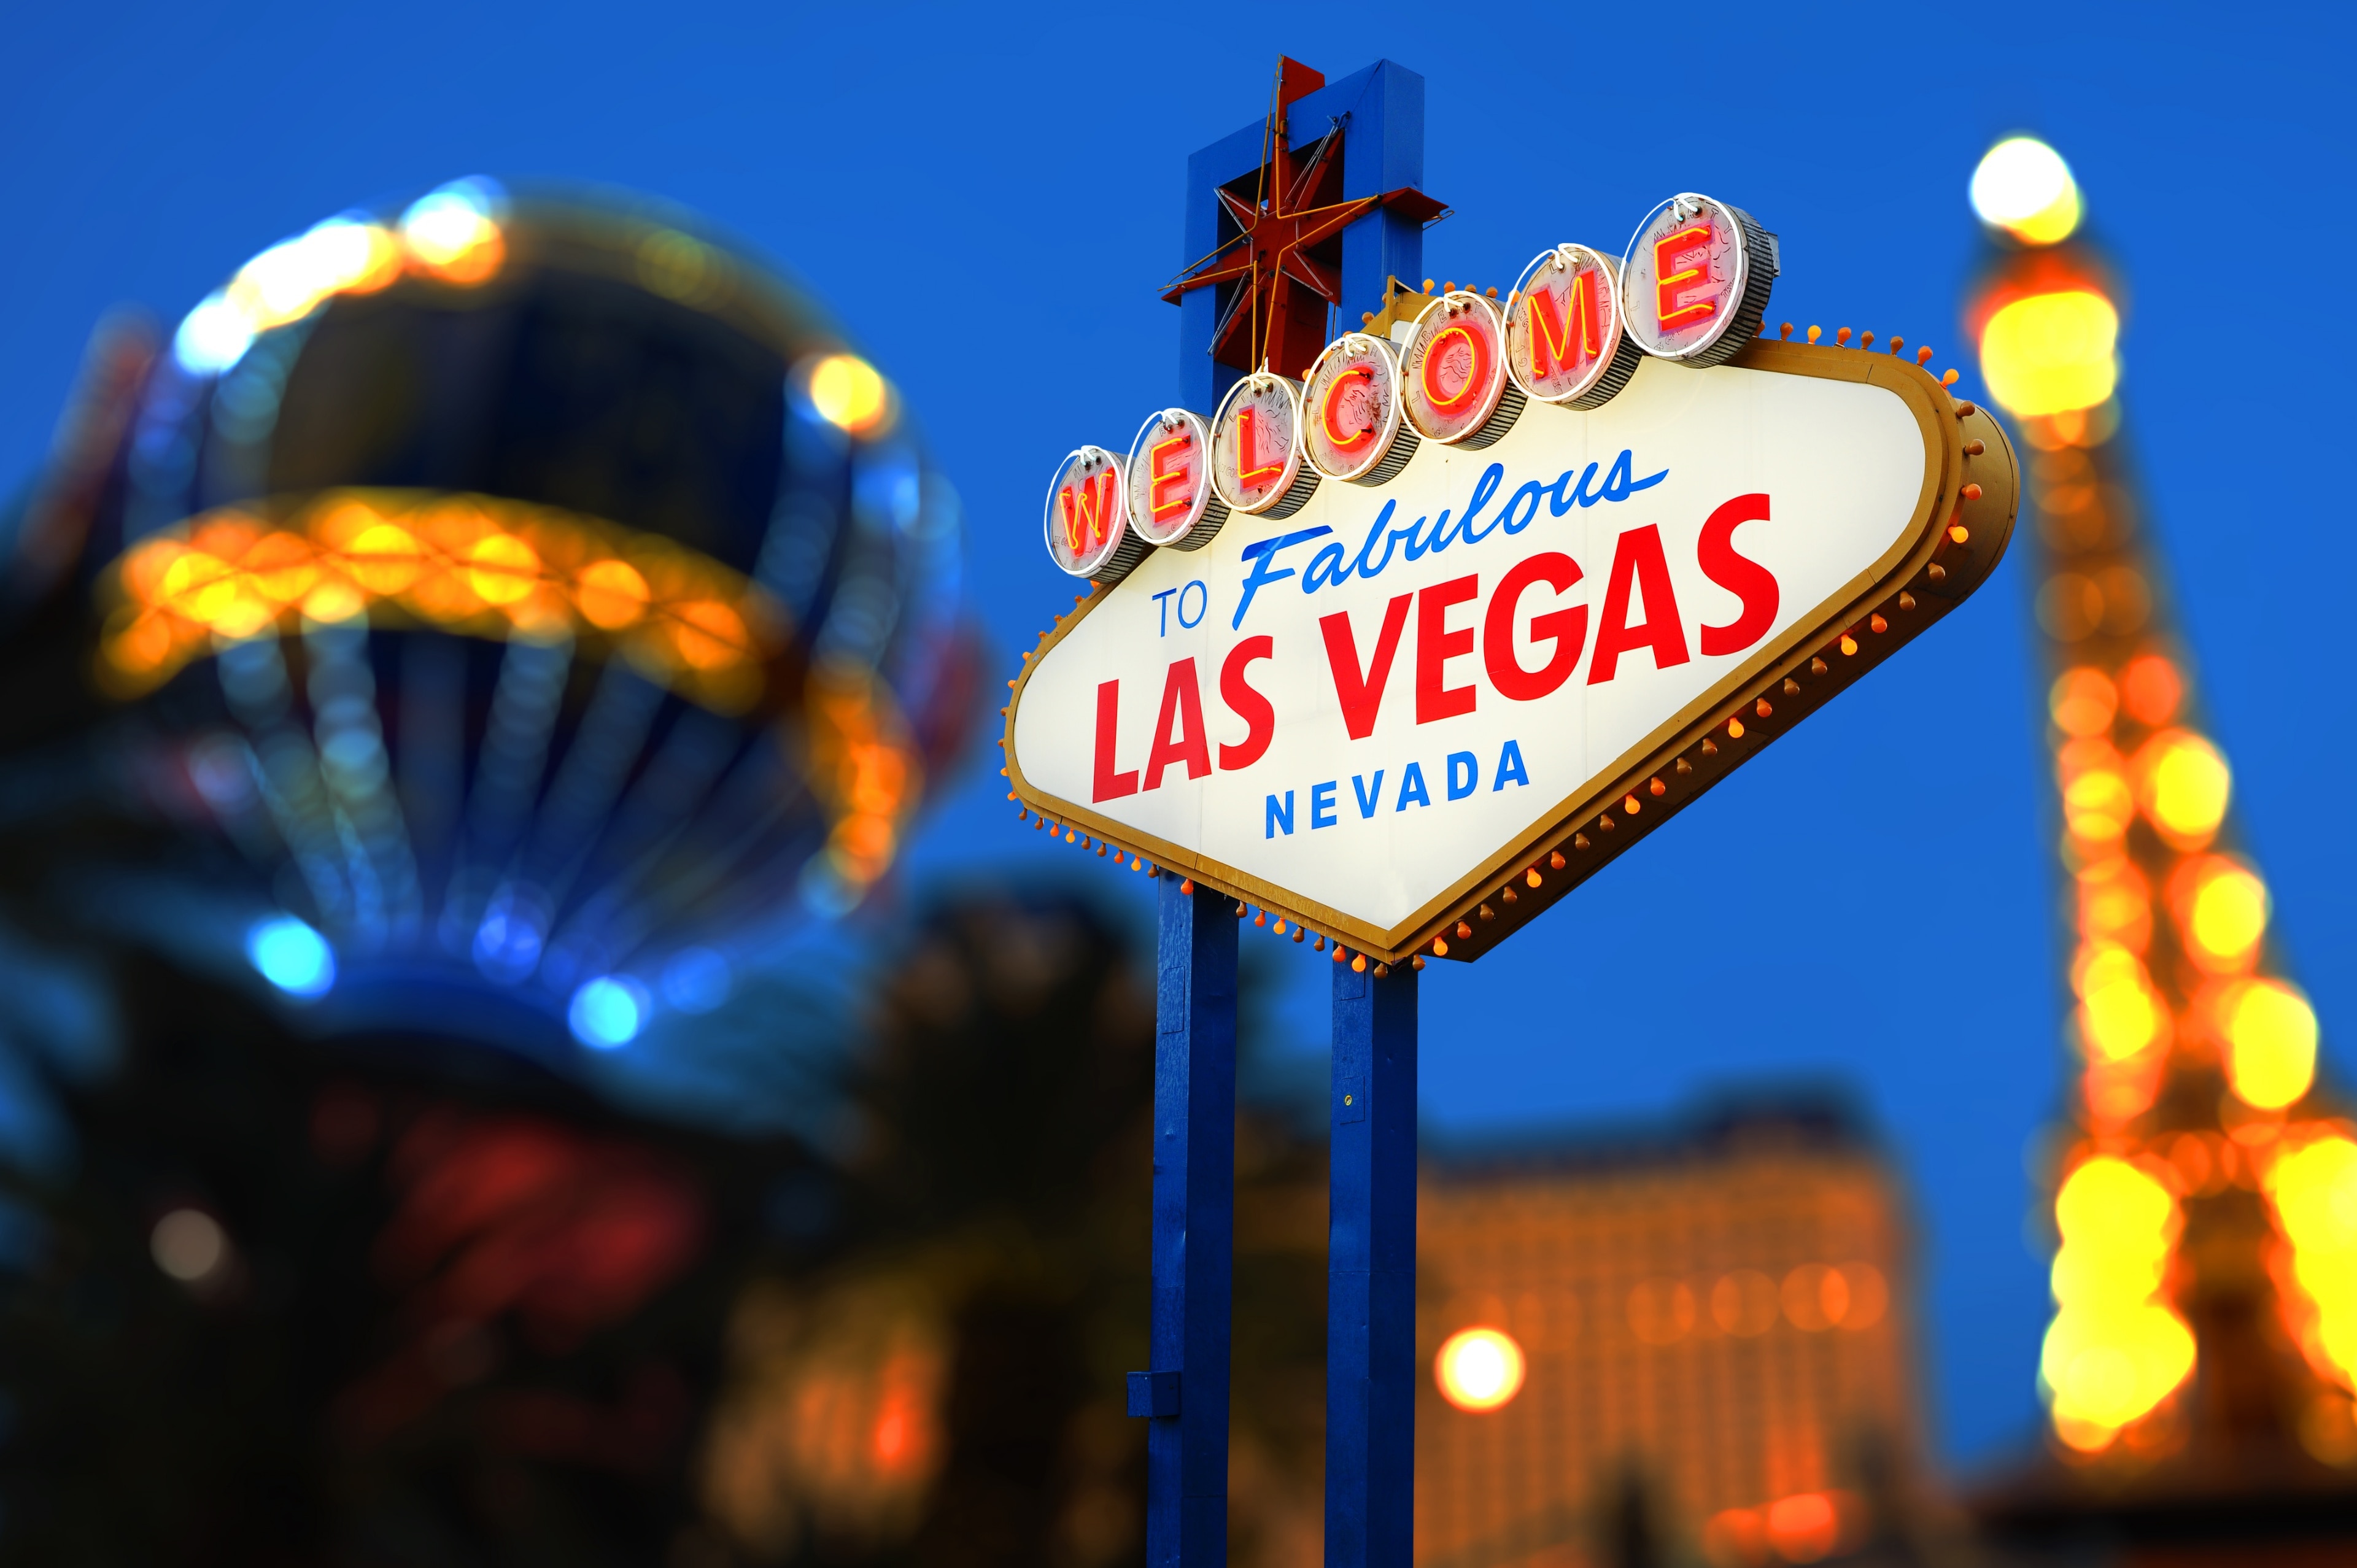 History of the Welcome to Fabulous Las Vegas Sign